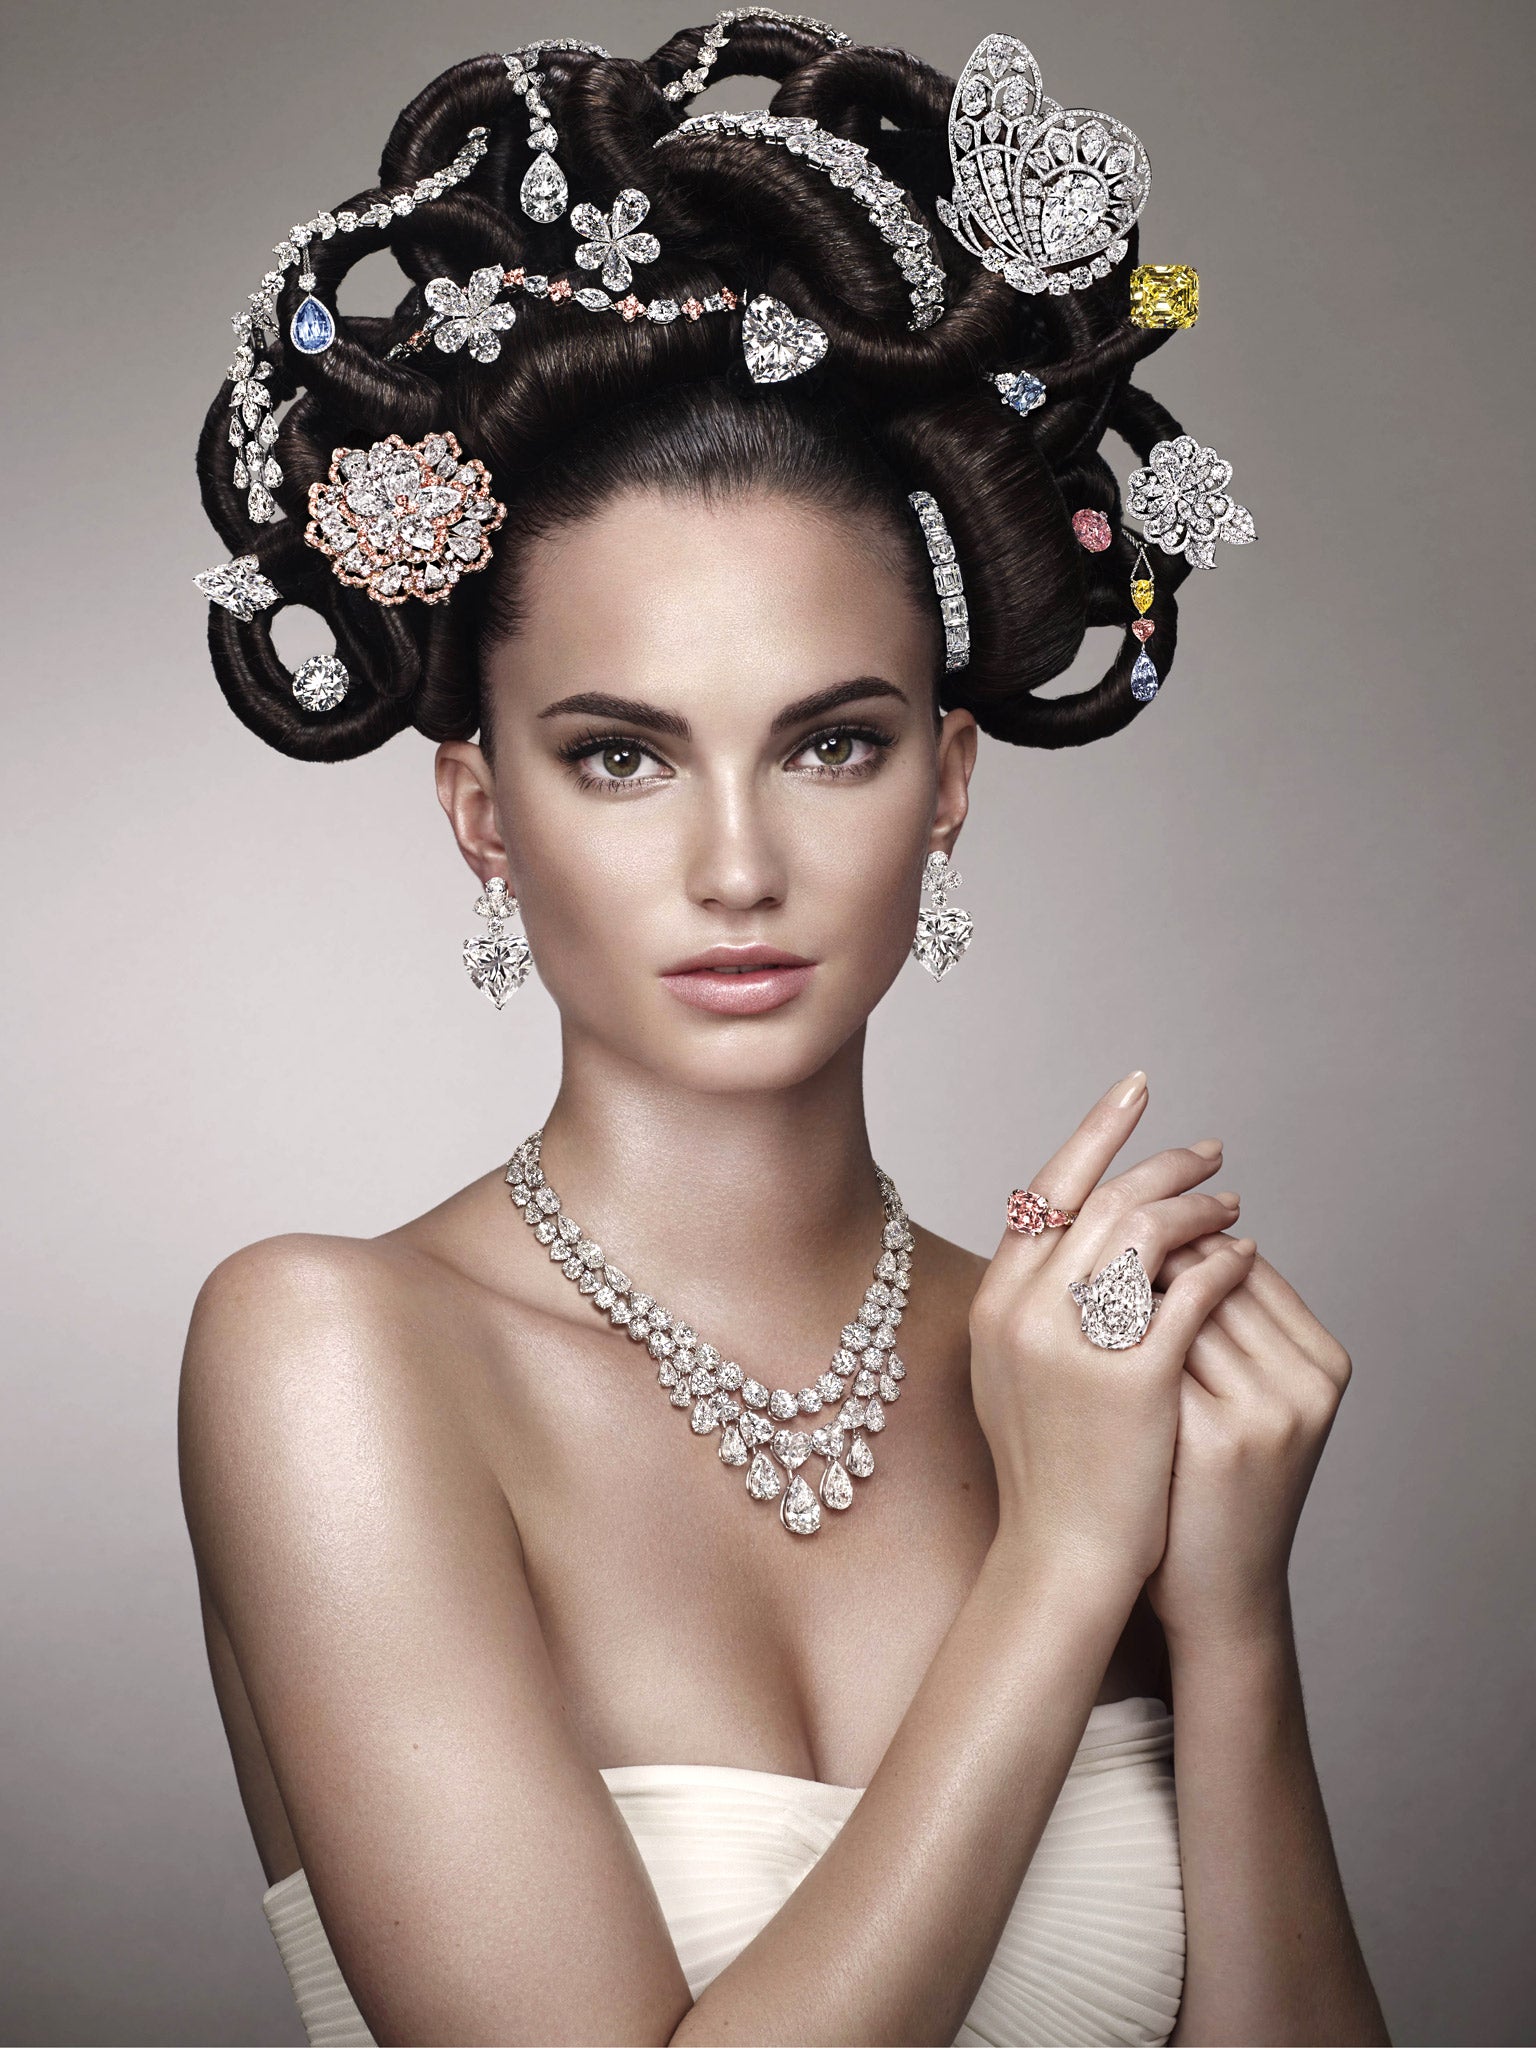 The diamonds used in the hair piece are valued at more than half a billion dollars